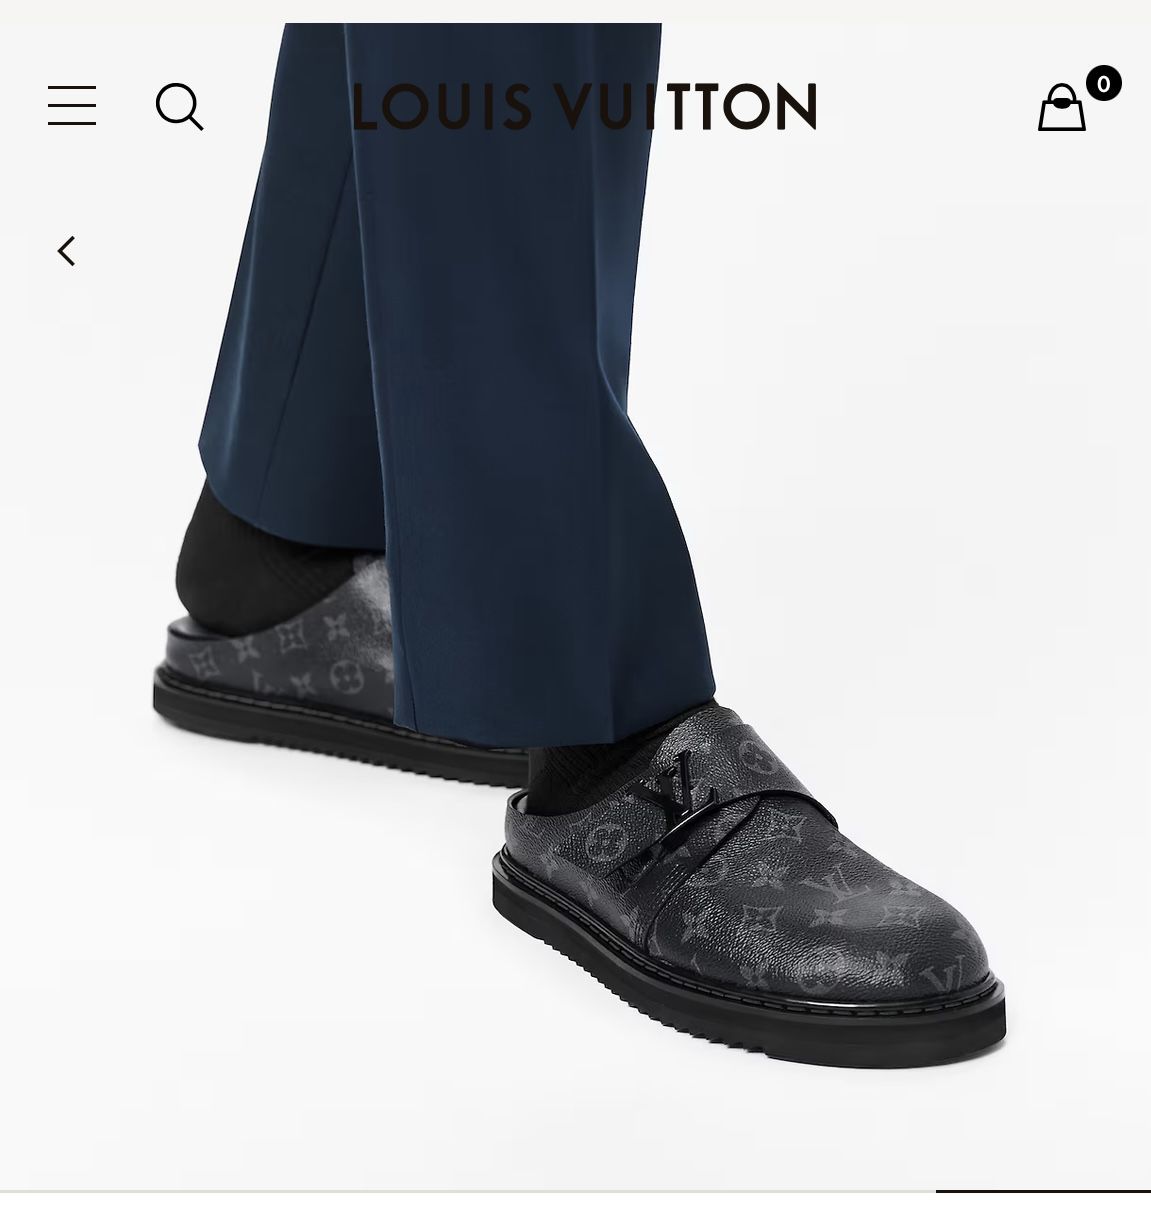 Authentic LV lock it flat mule for Sale in Orlando, FL - OfferUp